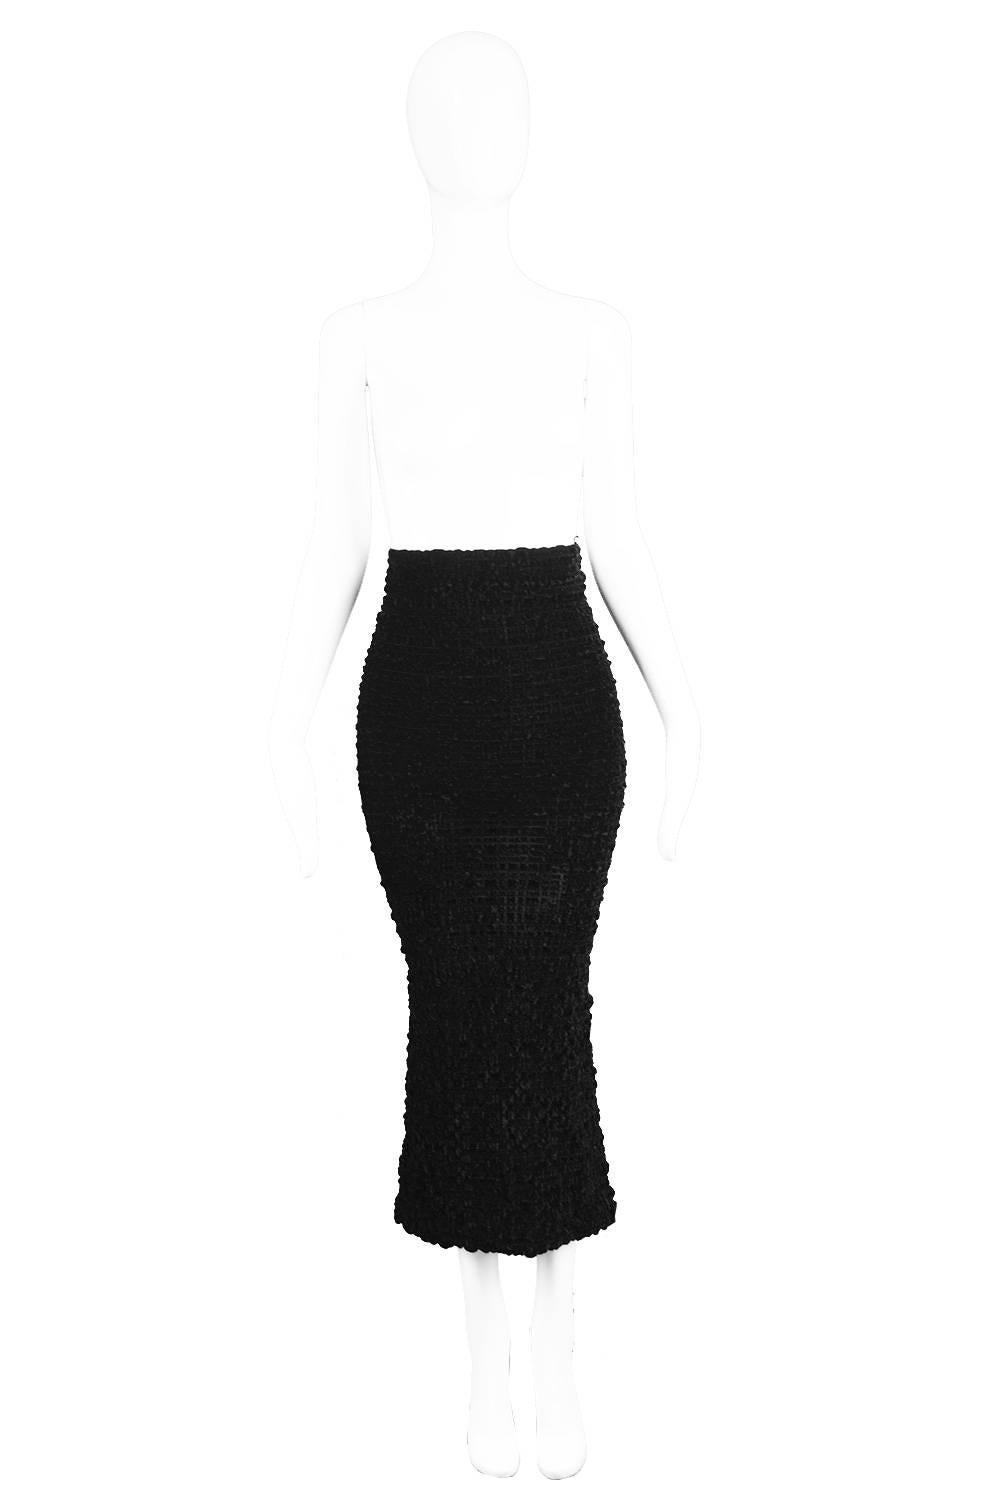 Romeo Gigli Vintage 1980s Black Velvet Textured Smocked Ruched Wiggle Skirt 


Estimated Size: UK 6/ US 2/ EU 34. Please check measurements.
Waist - 25” / 63cm
Hips - 32” / 81cm (has stretch at hips)
Length (Waist to Hem) - 36” / 91cm

Condition: